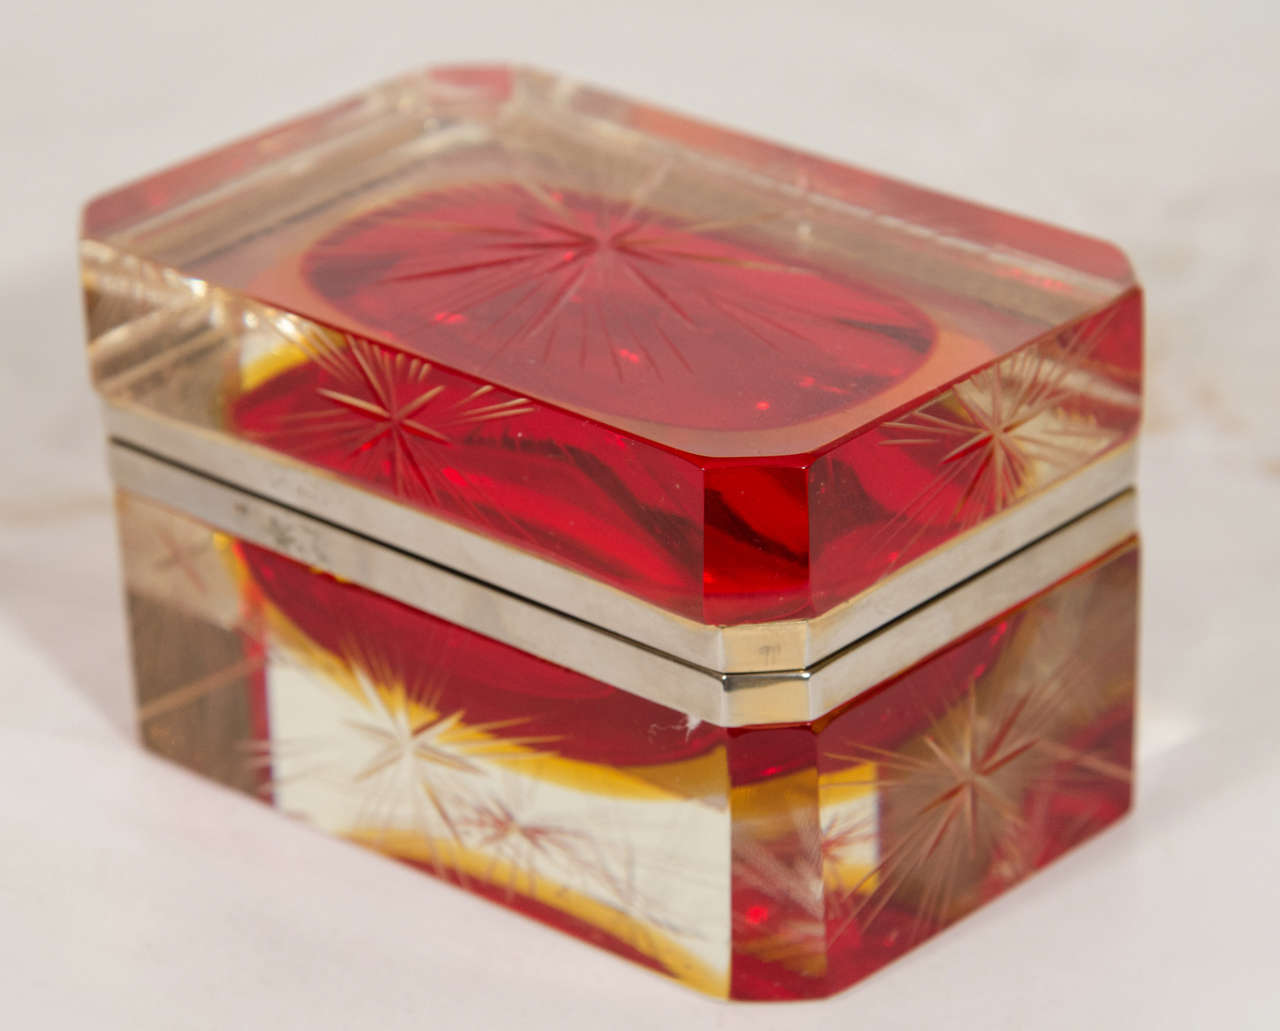 A vintage clear and red Italian heavy glass box attributed to Murano.